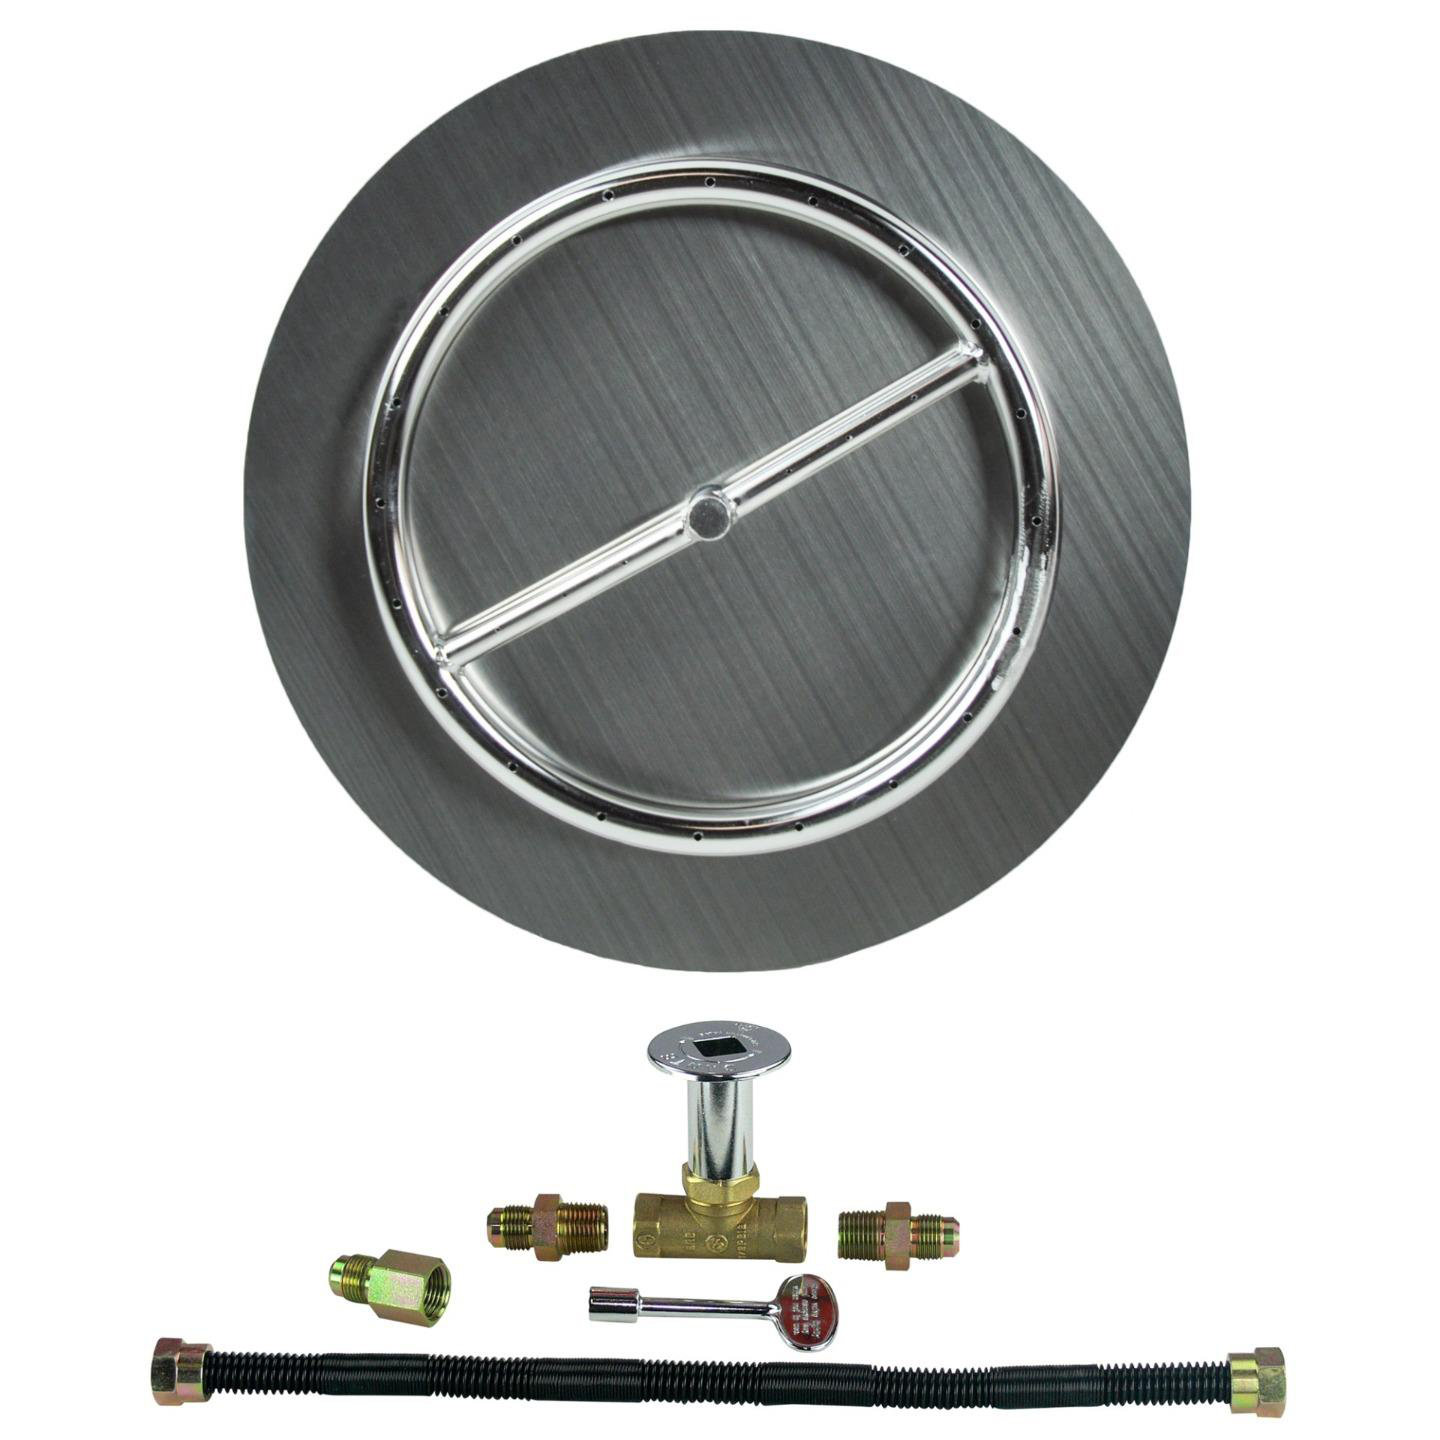 The Original 18 NG Stainless Steel Burner Pan with 12 Stainless Steel Ring Fire Pit Kit Dreffco 